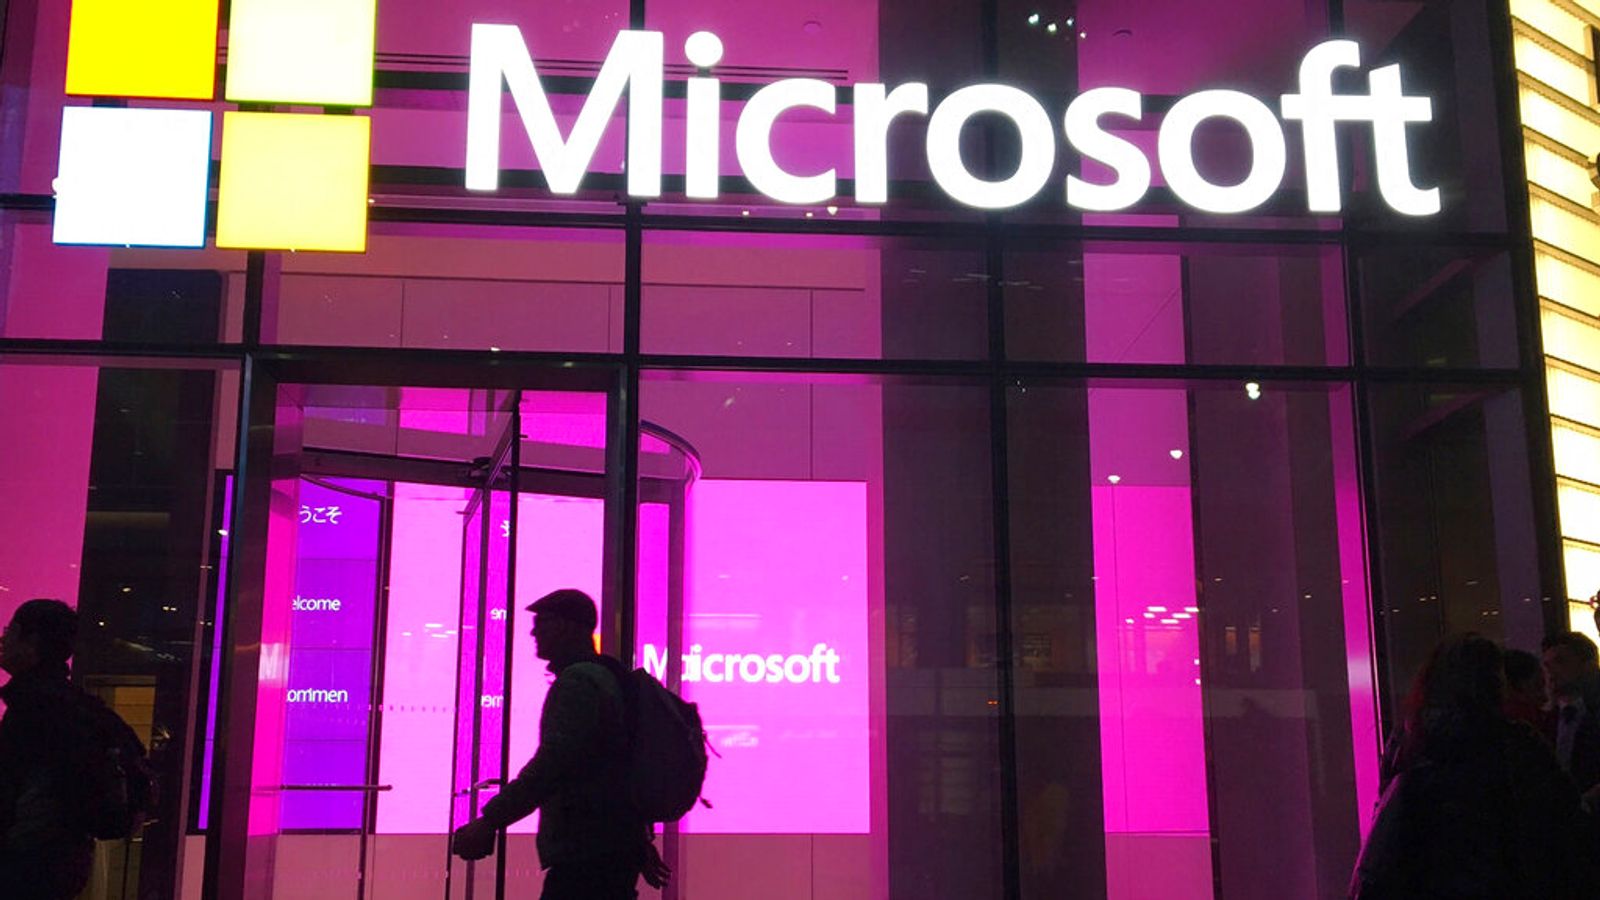 Microsoft warns multiple groups attacking clients' email servers, not just Chinese hackers